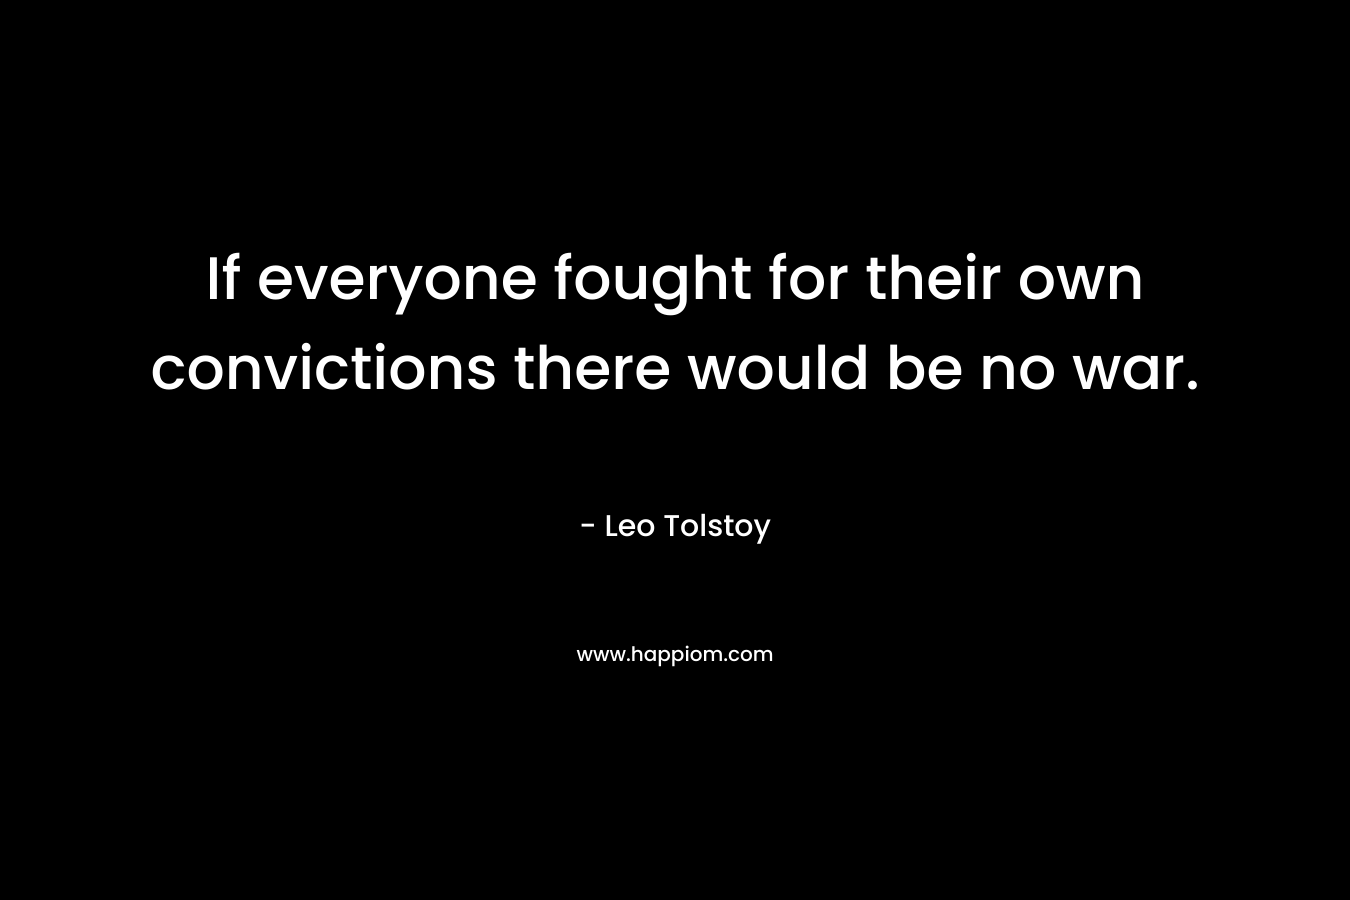 If everyone fought for their own convictions there would be no war. – Leo Tolstoy